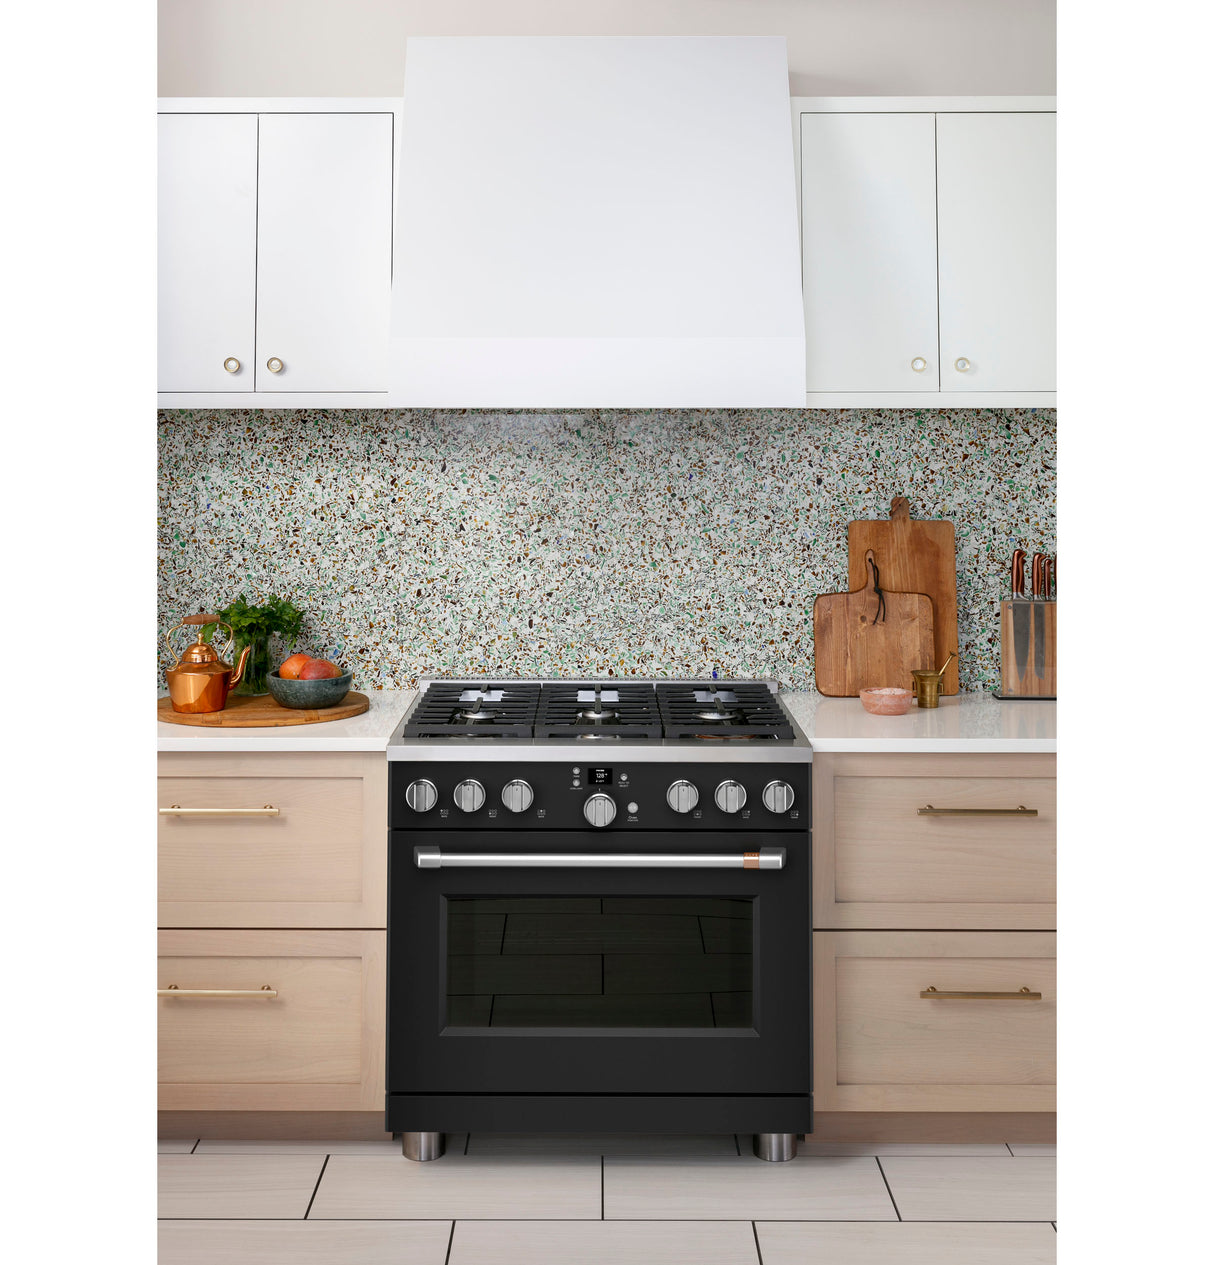 Caf(eback)(TM) 36" Smart Dual-Fuel Commercial-Style Range with 6 Burners (Natural Gas) - (C2Y366P3TD1)